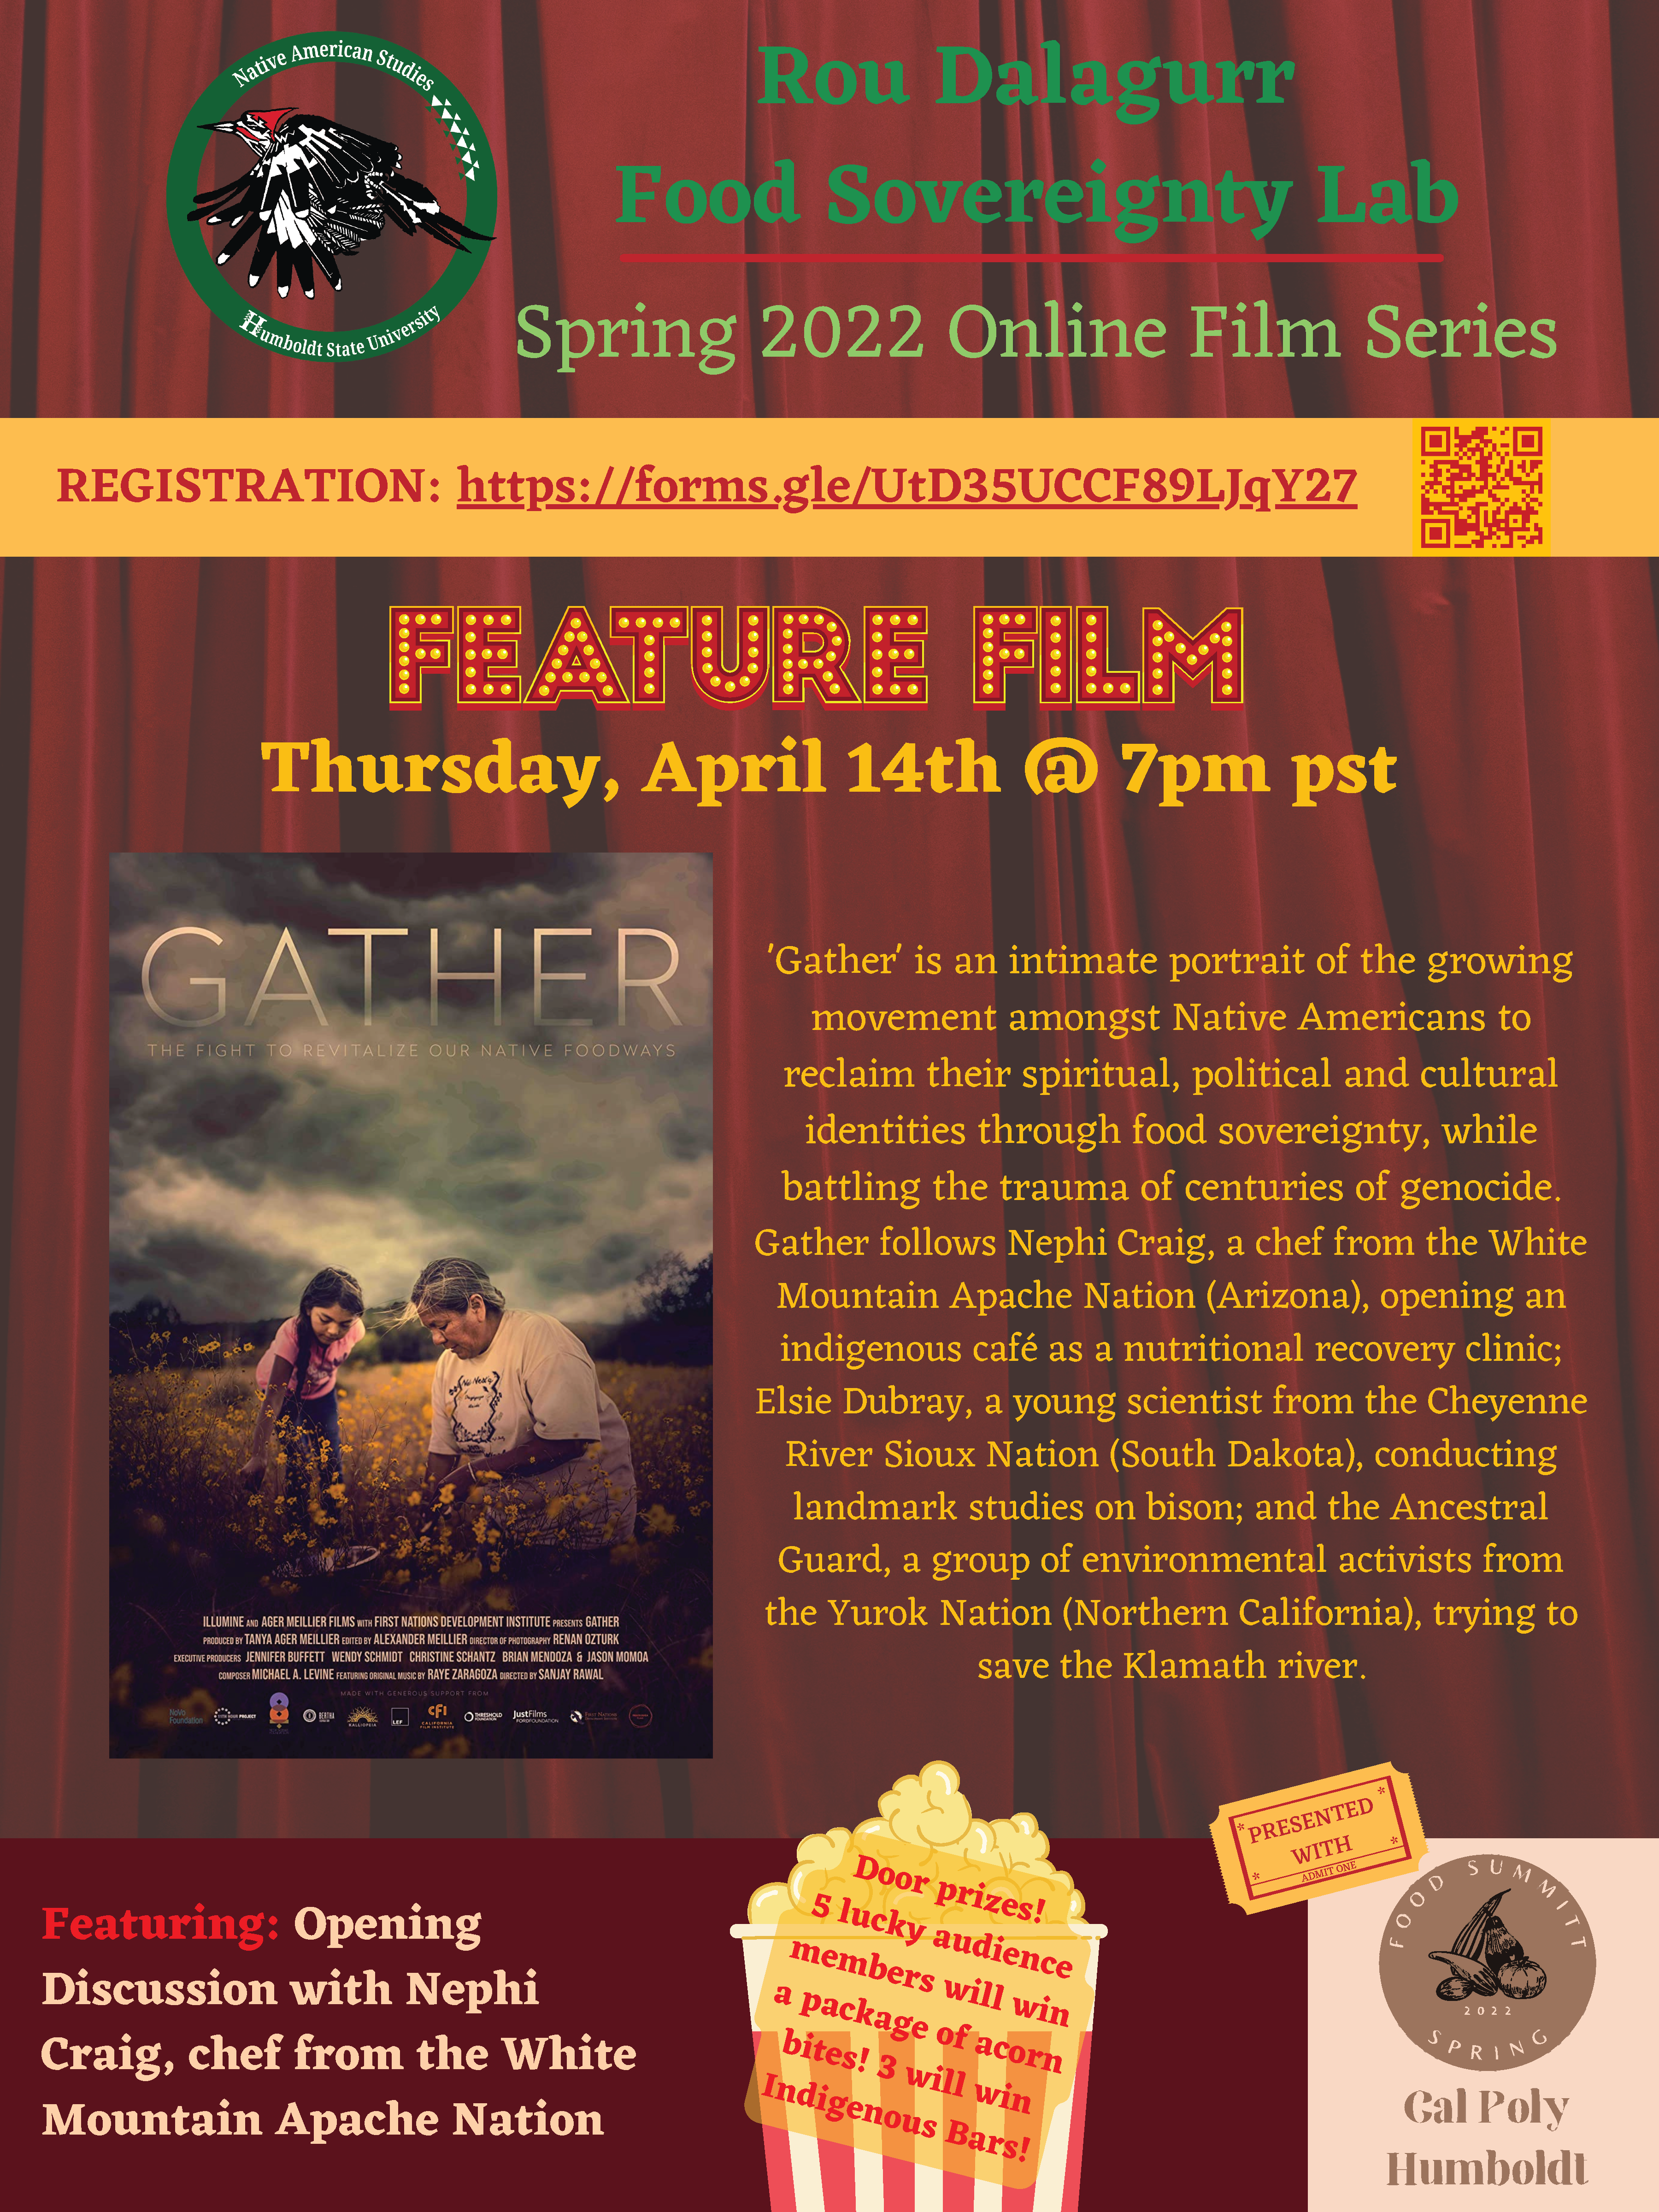 Film Screening: Gather 7pm Film Screening: Gather Hosted on Zoom Register at https://forms.gle/UtD35UCCF89LJqY27 